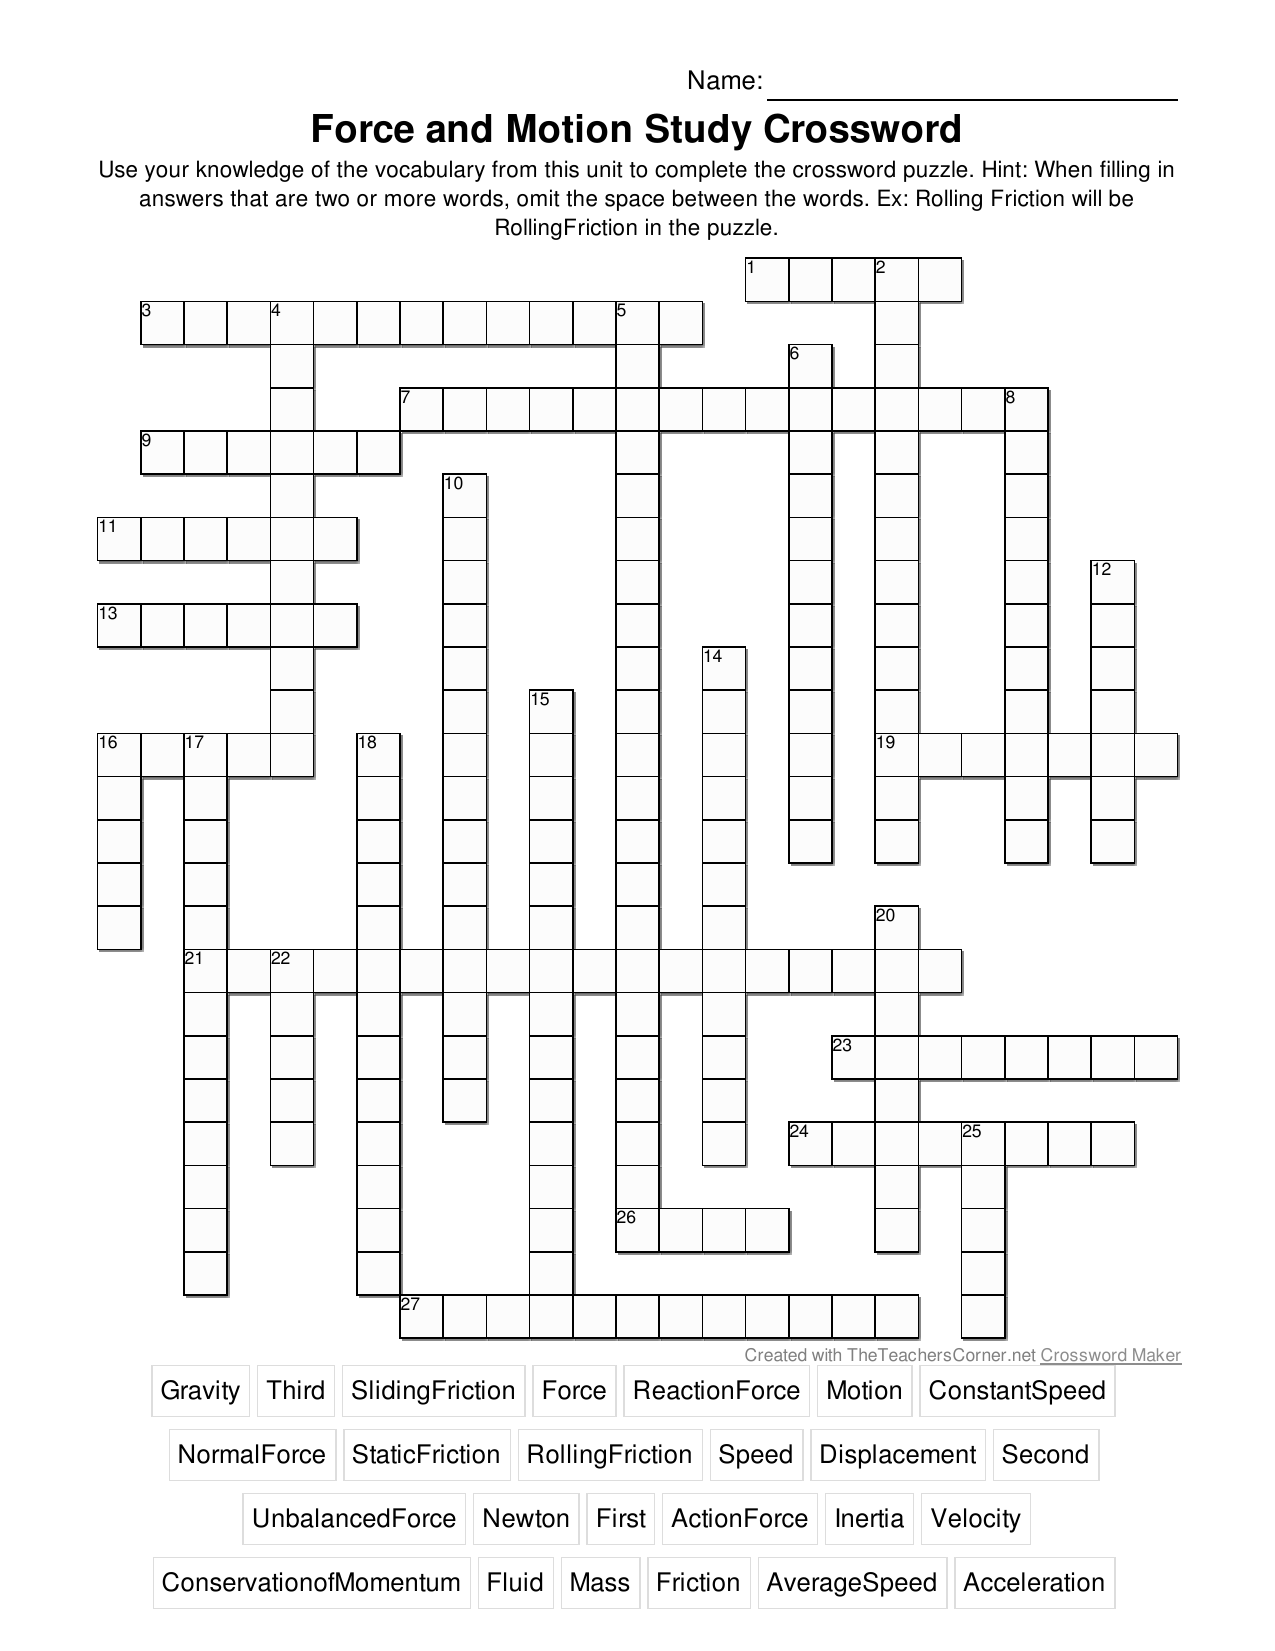 printable-crossword-puzzles-with-answer-key-february-crossword-puzzle-answer-key-printables